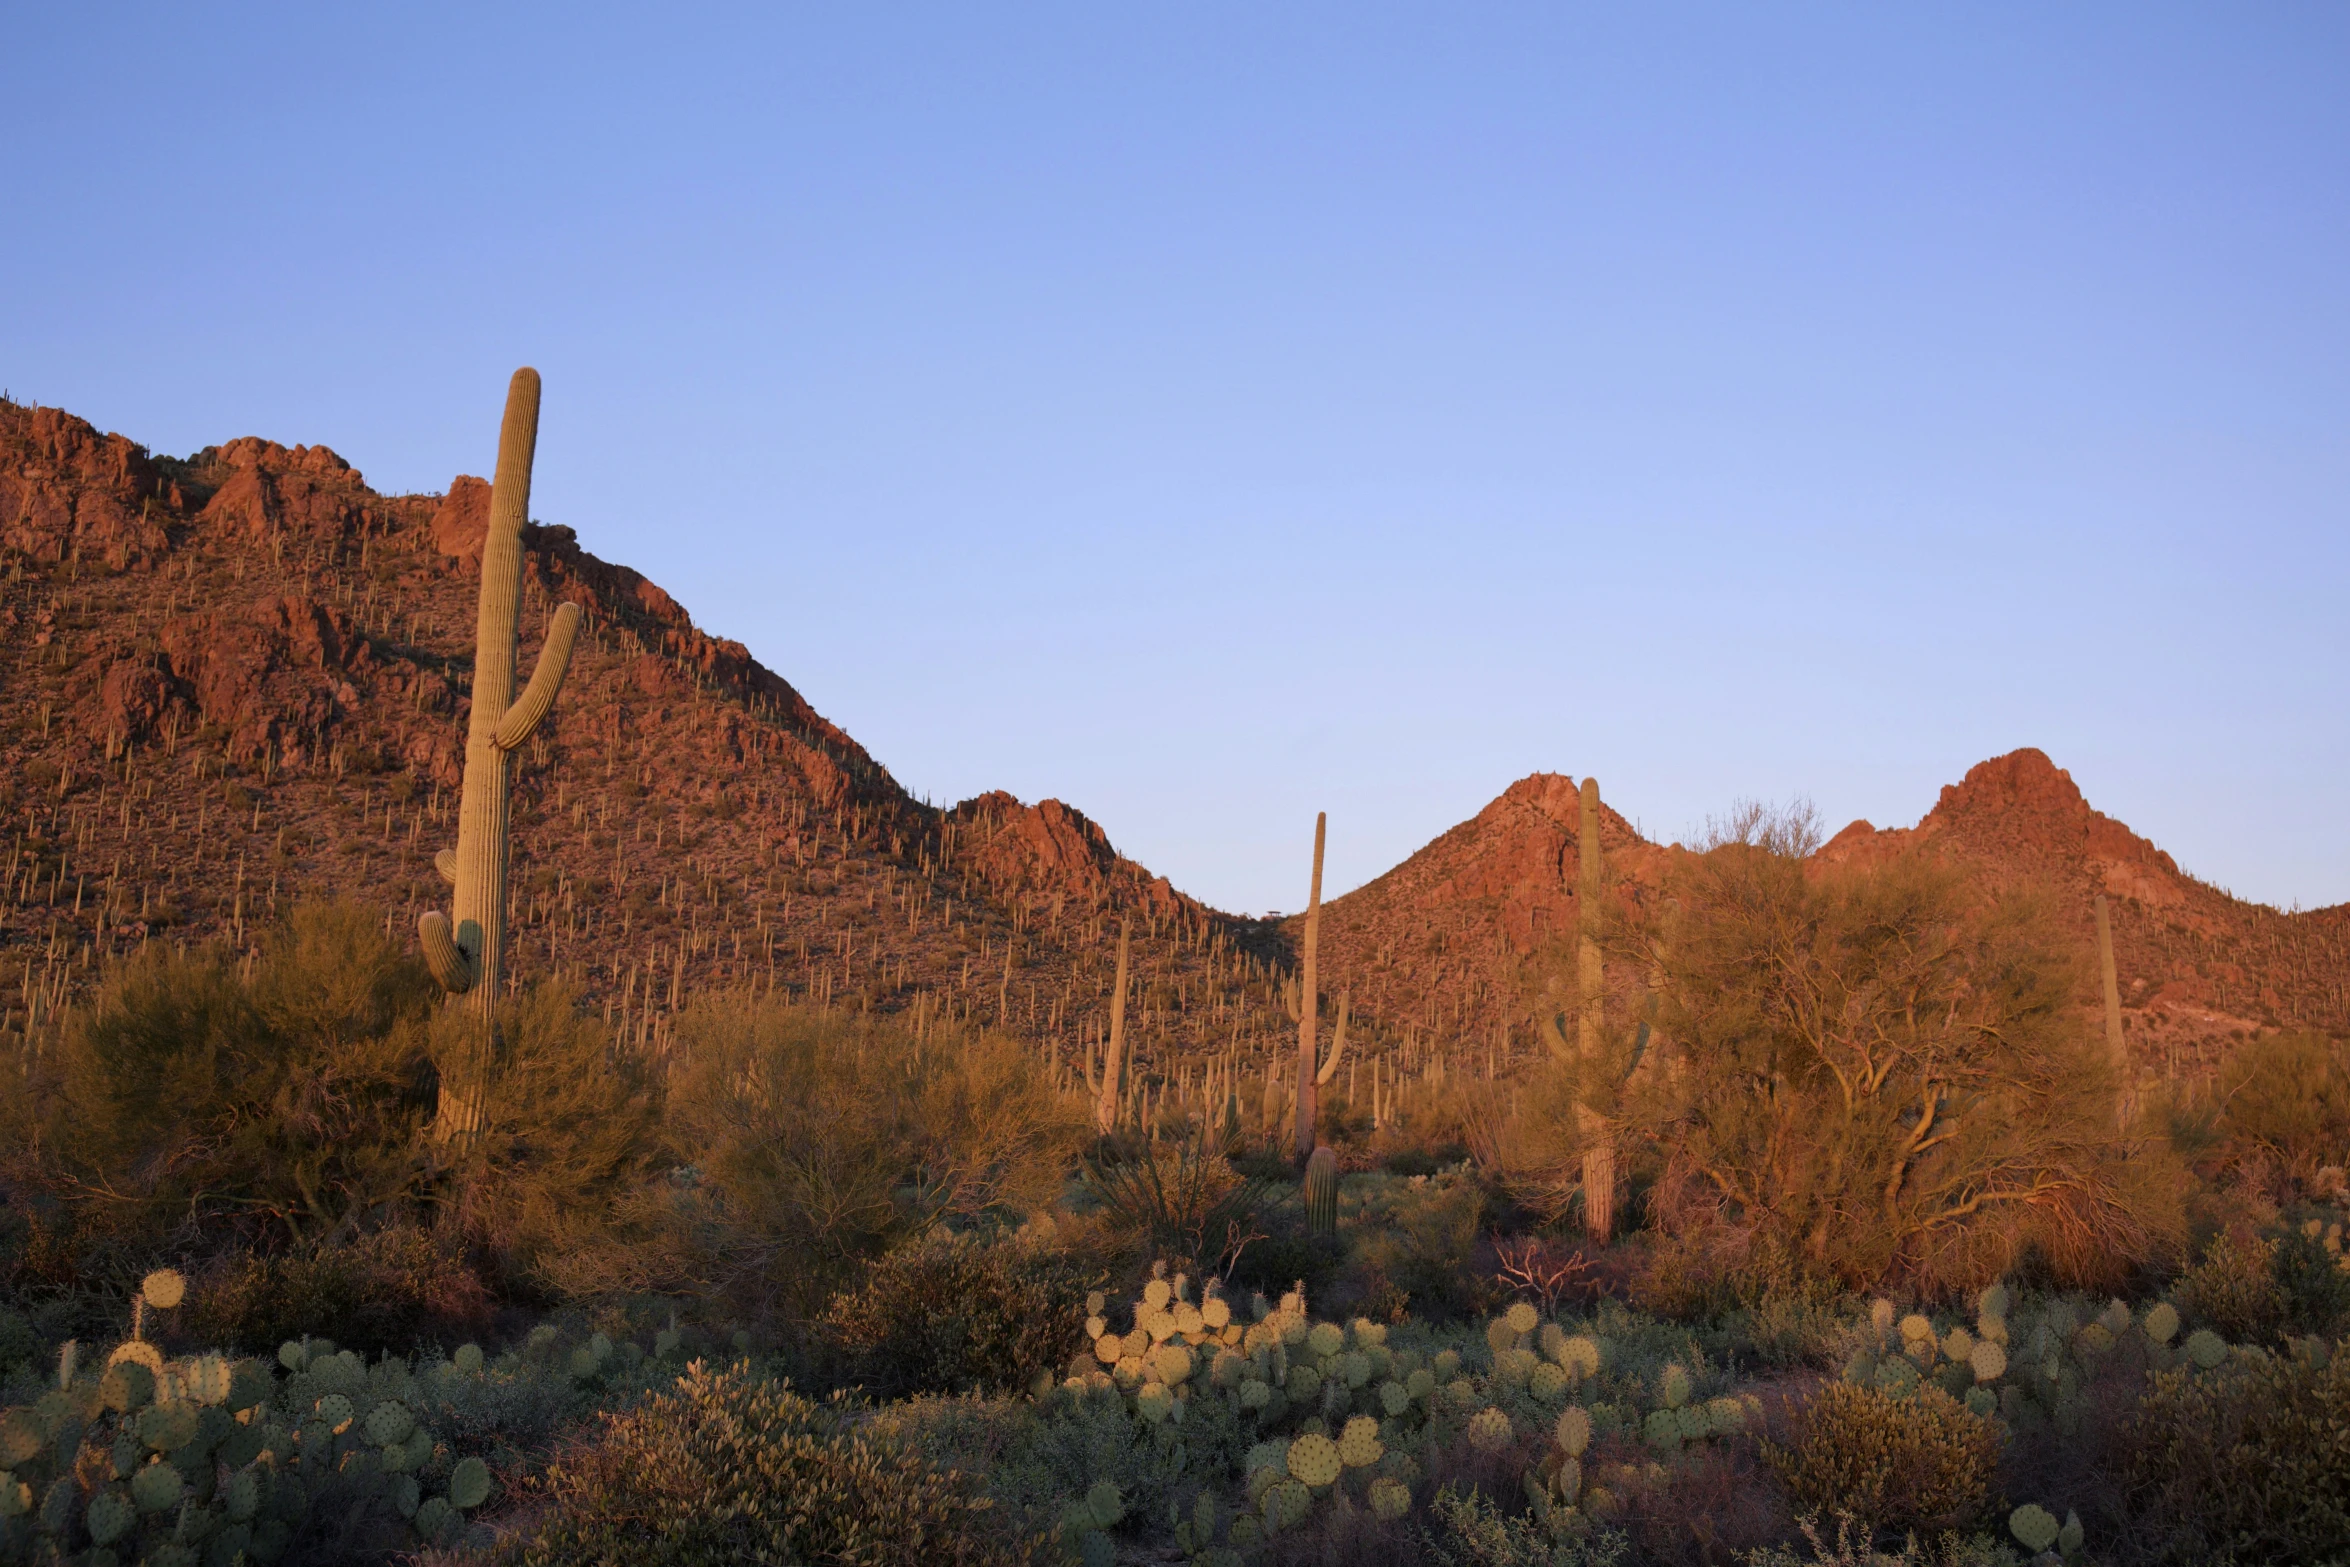 there are many large, desert like mountains along with a cactus